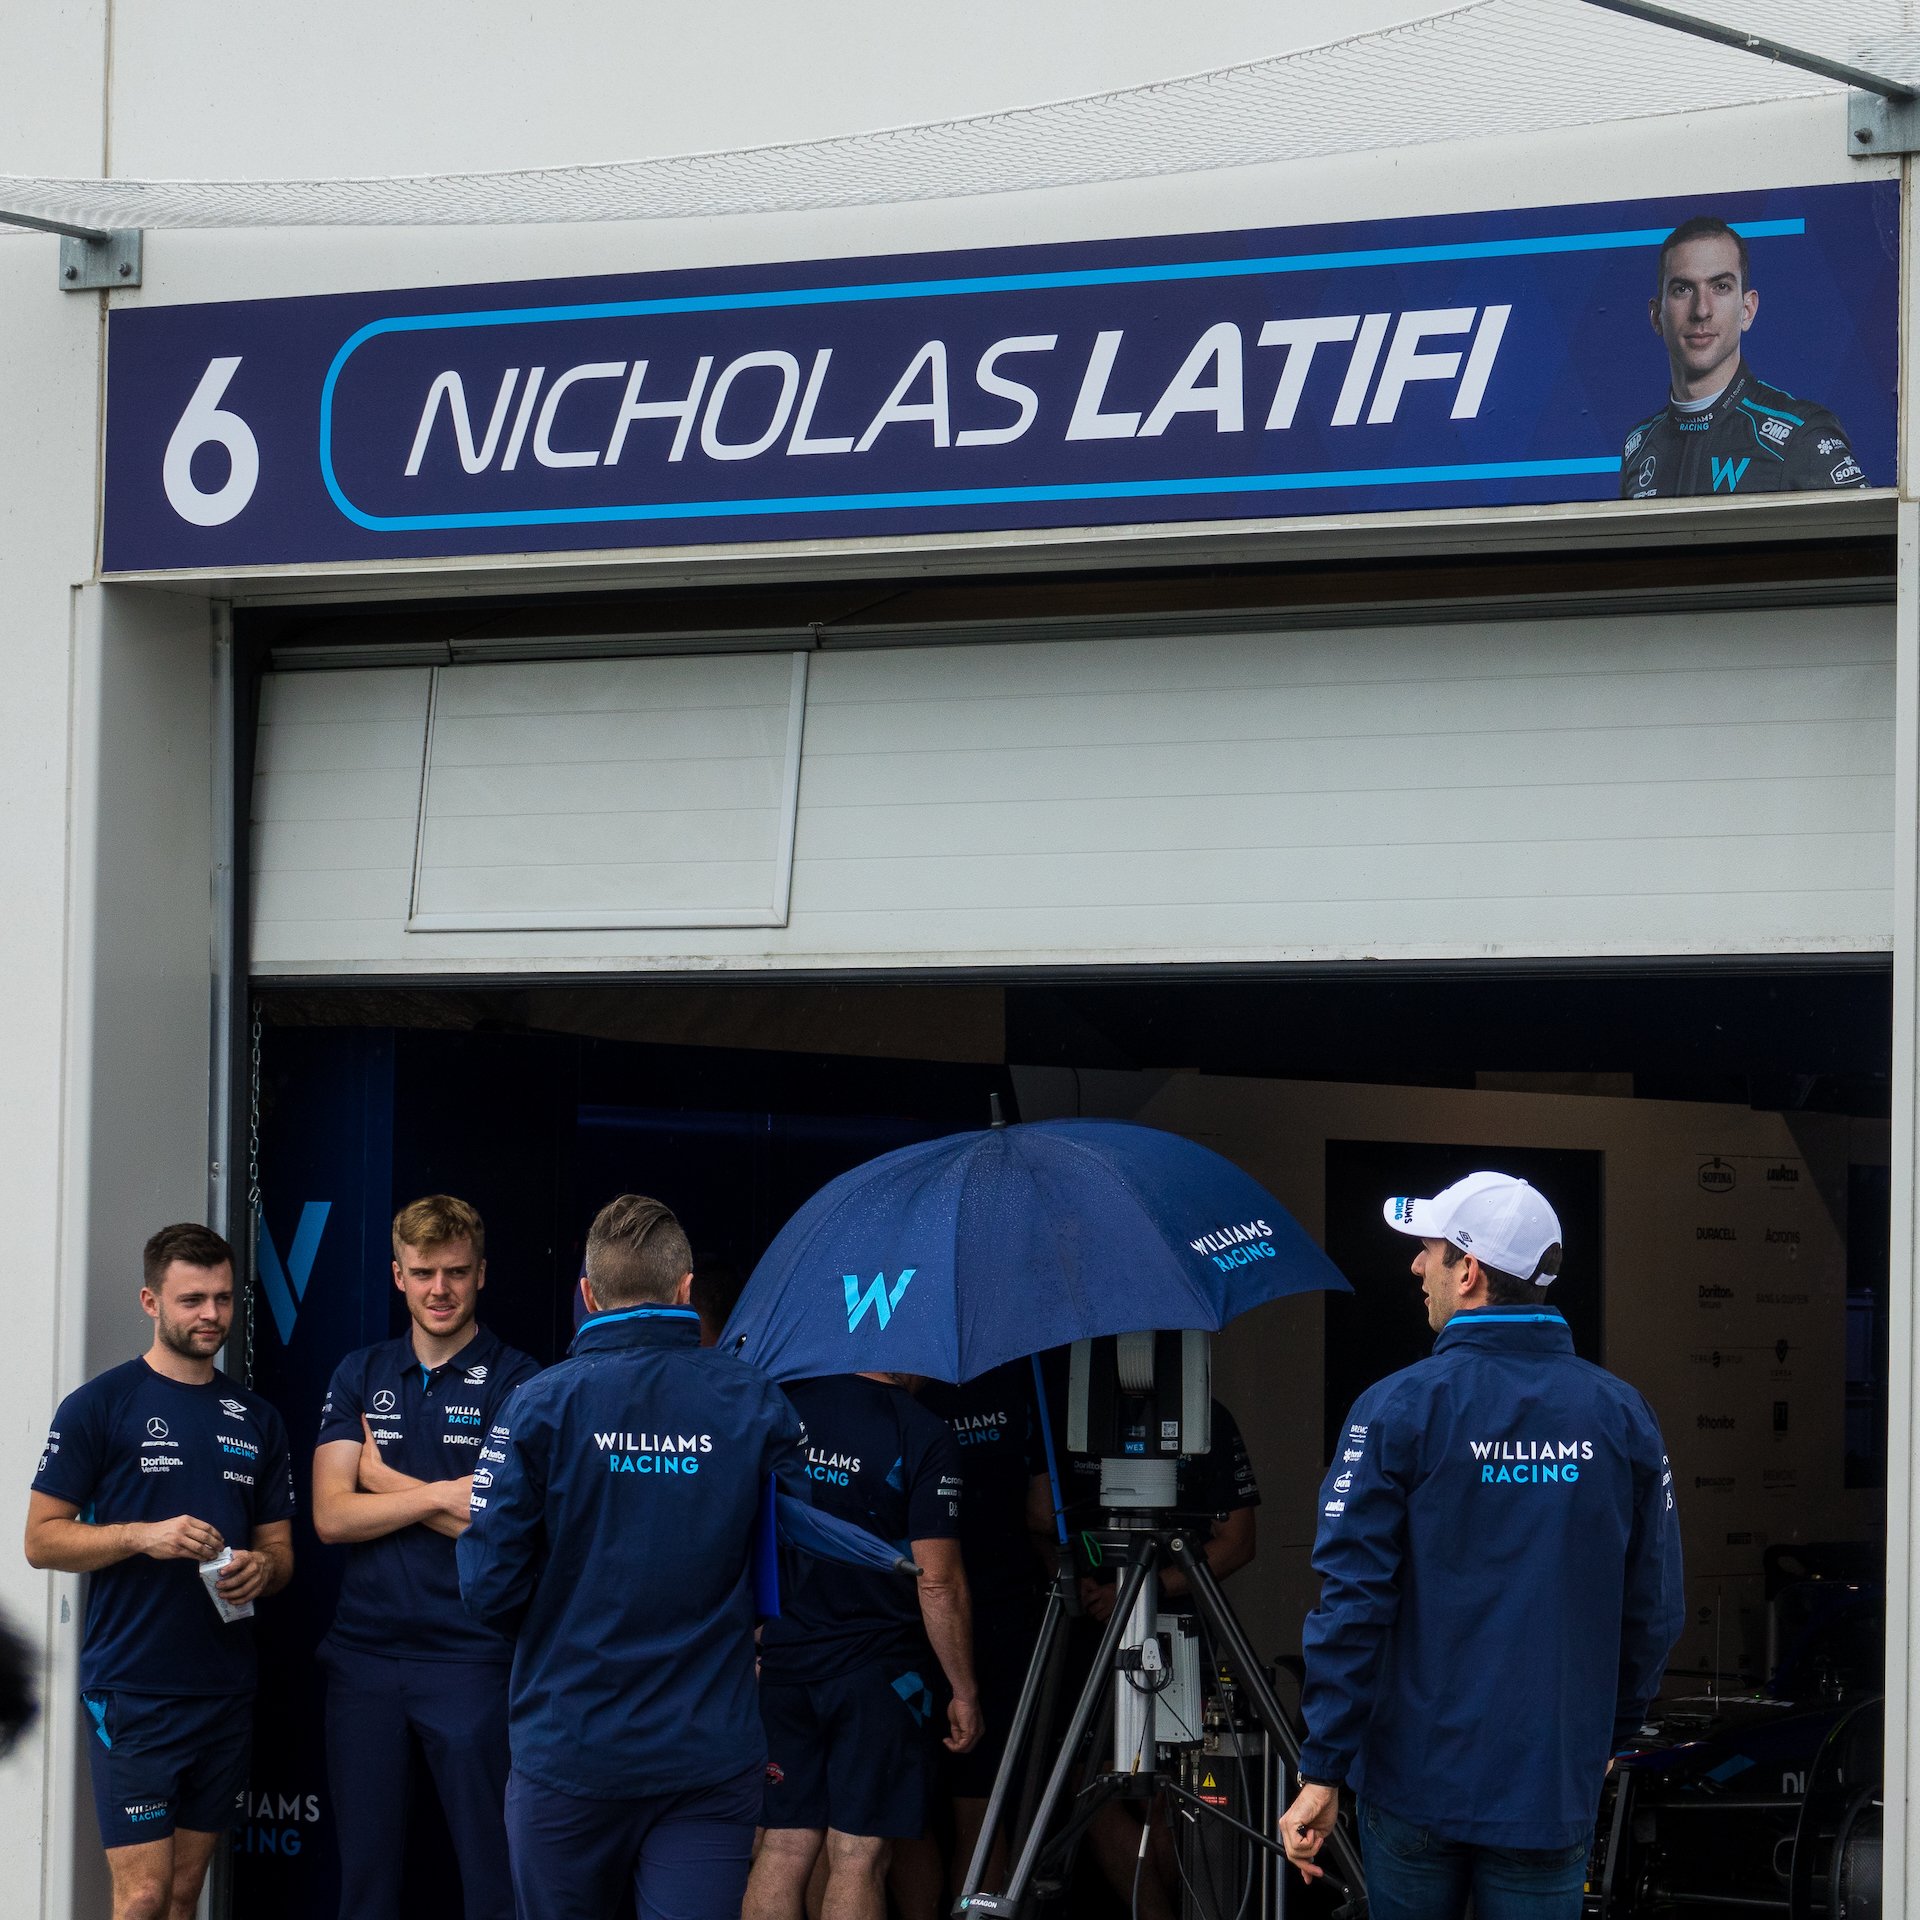  Nicholas Latifi (white hat on the right), heading into the Williams garage. One of the two Canadian drivers on the grid.  